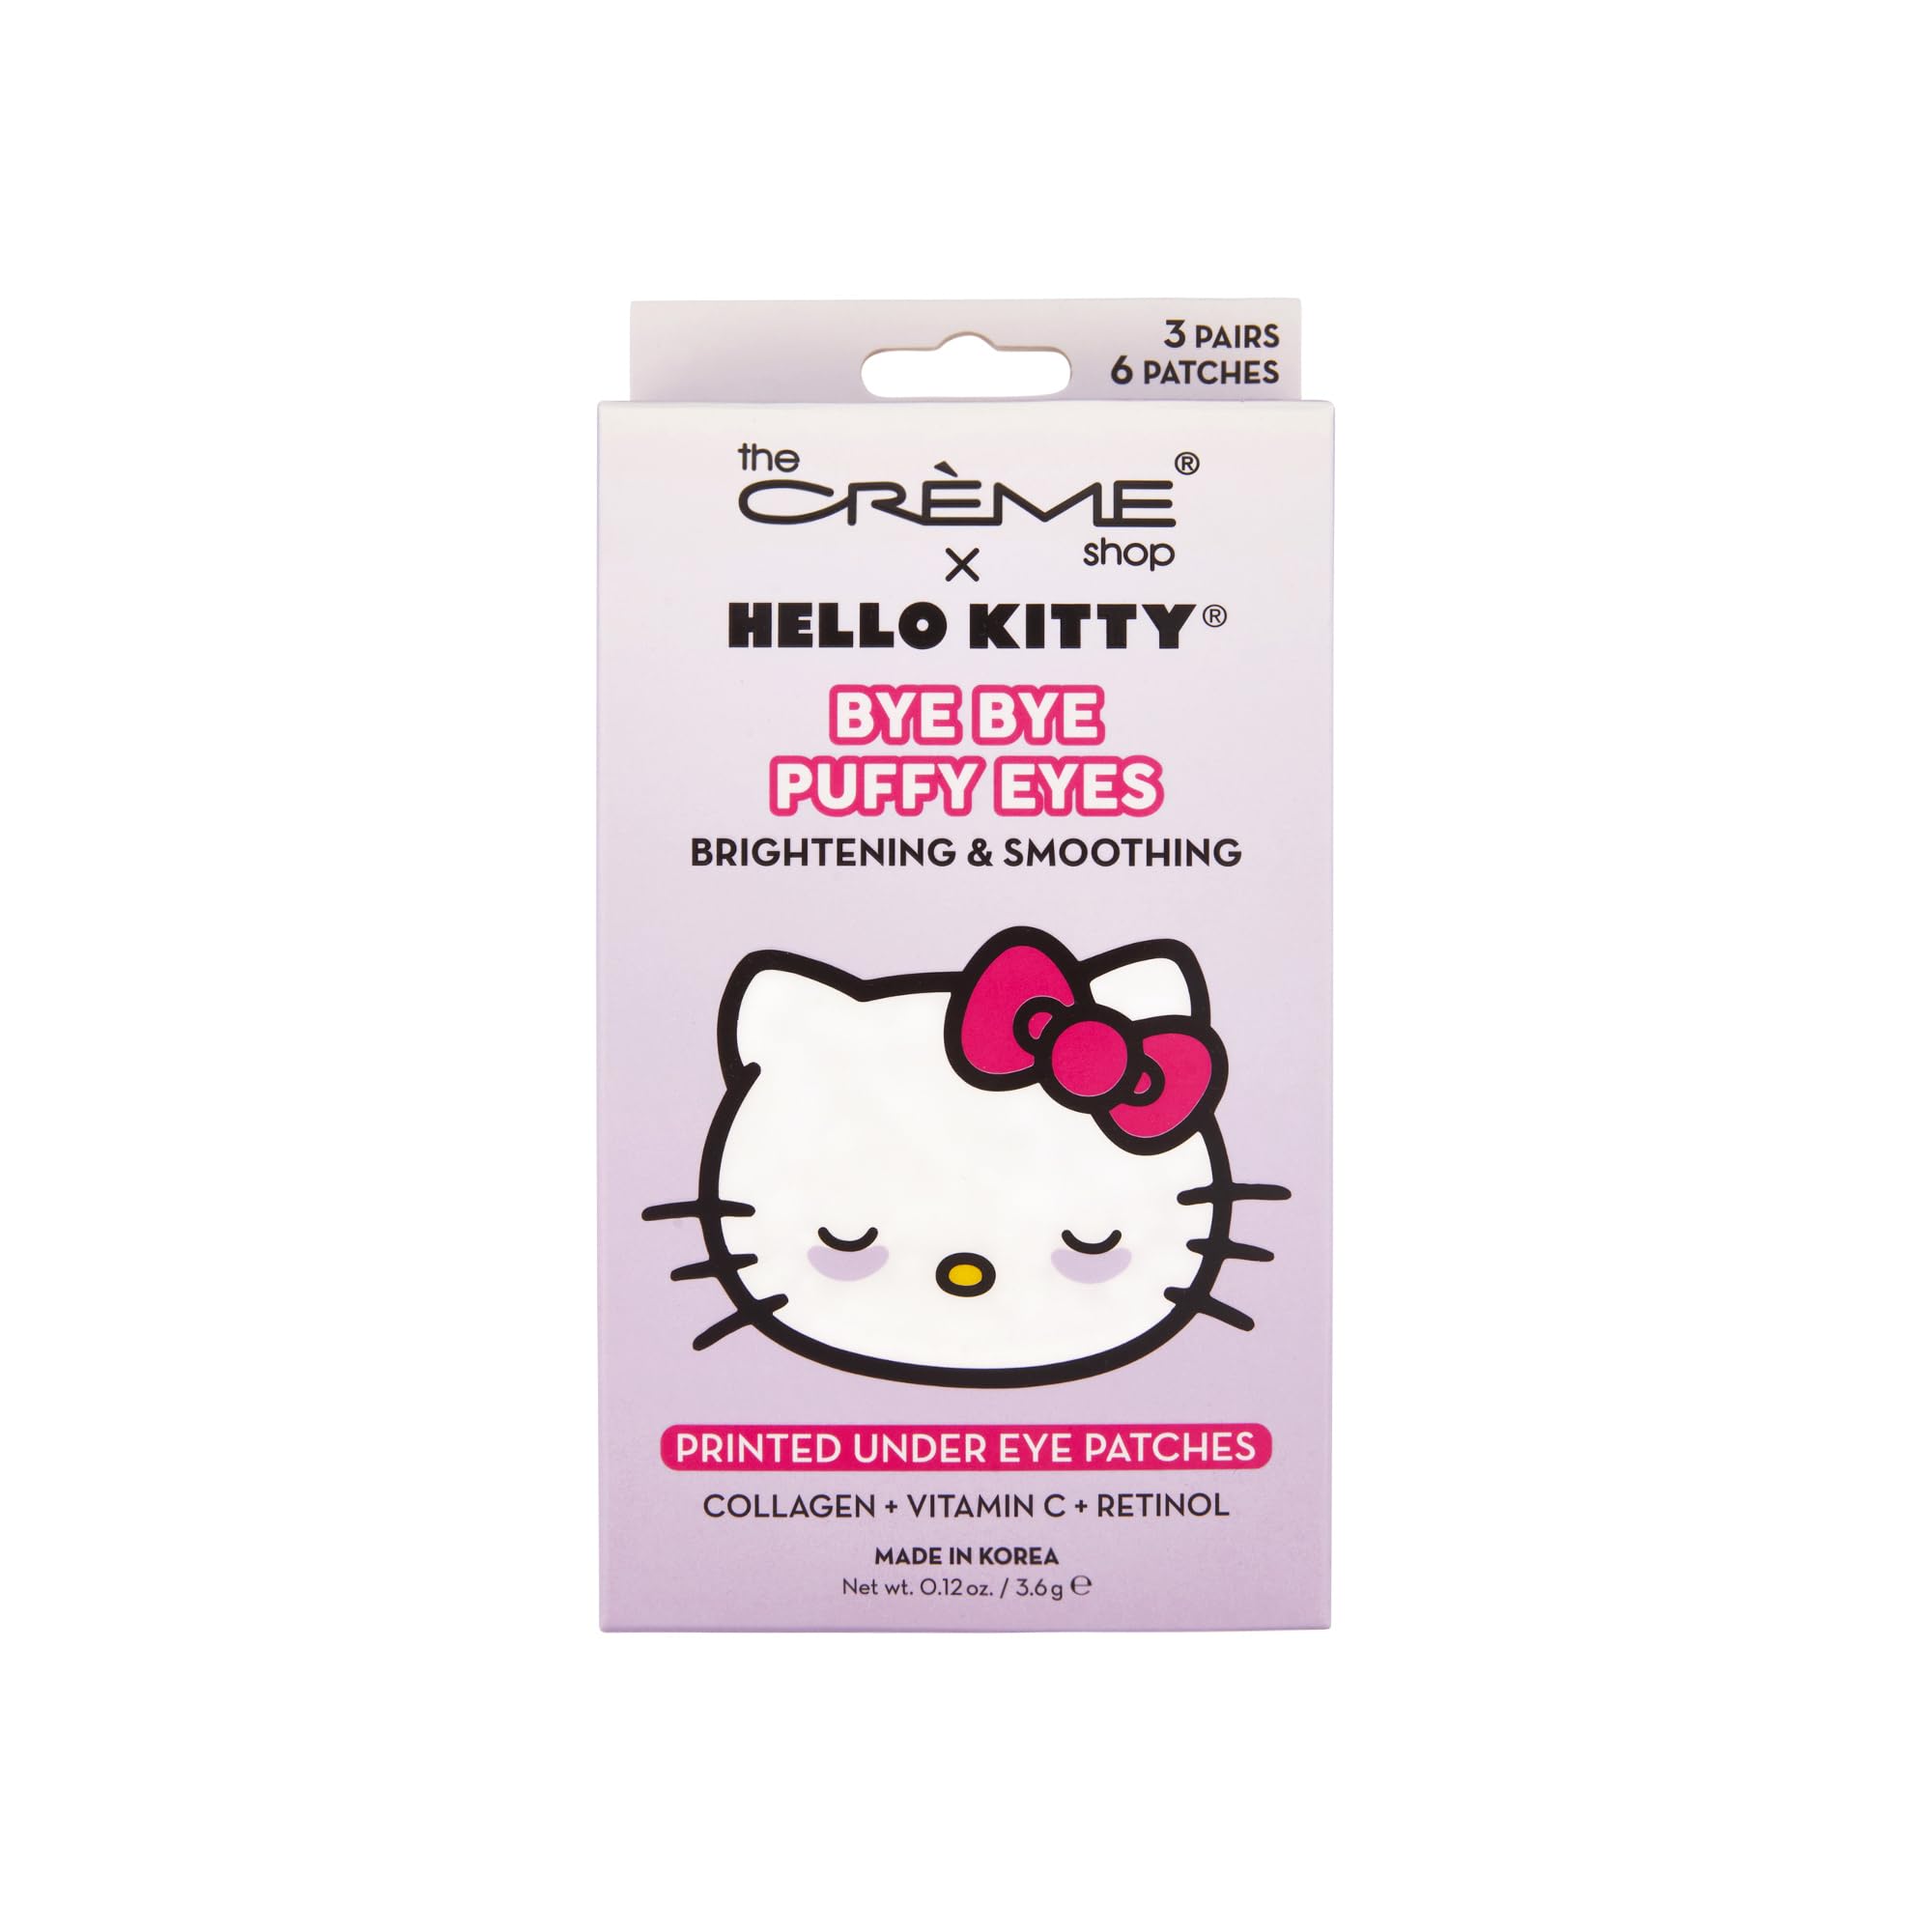 The Crème Shop x Sanrio Hello Kitty Byebye Puffy Eyes Under Eye Patches